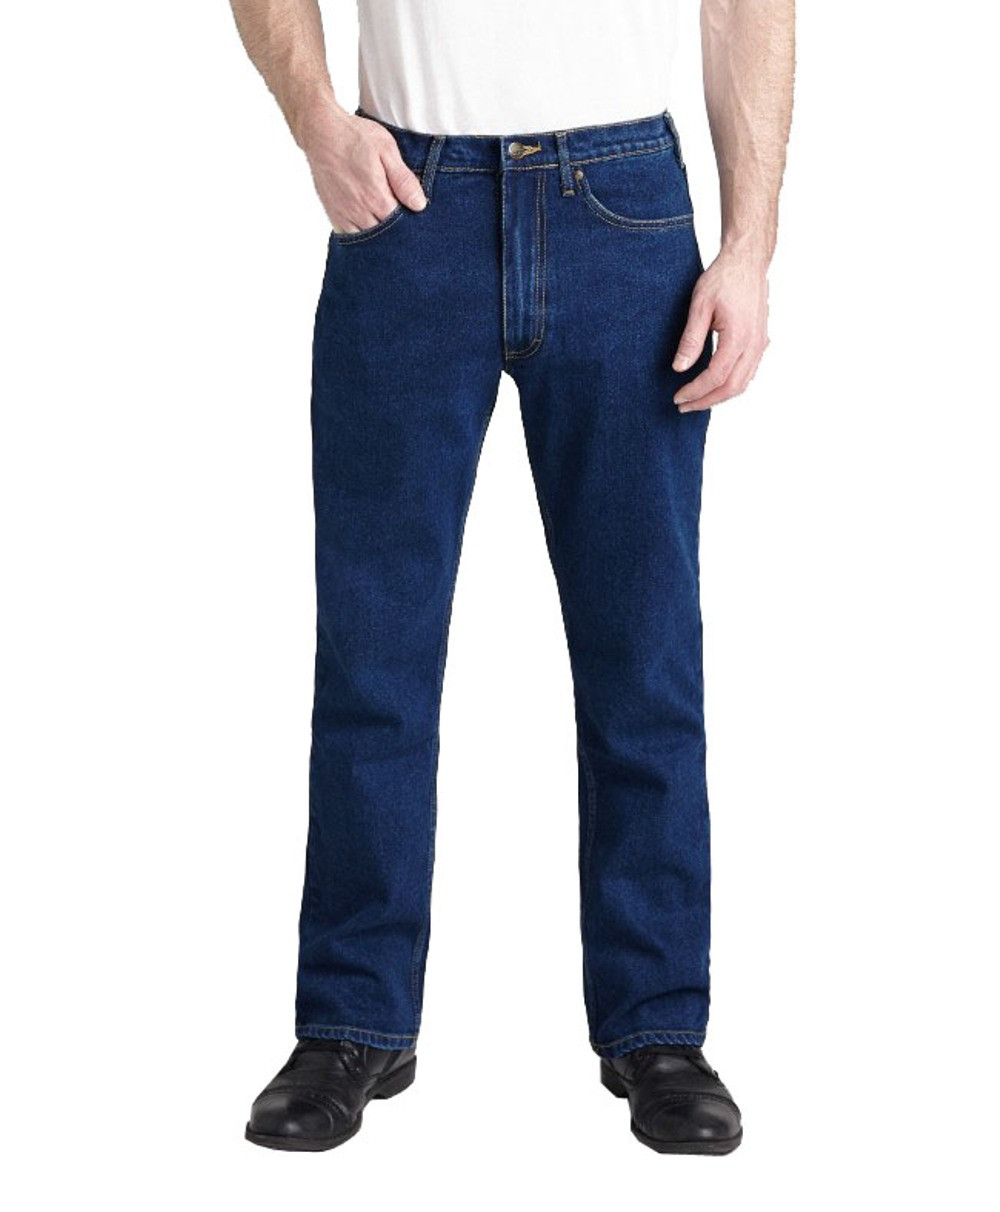 Grand River Stretch Traditional Straight Cut Jeans - Dick Anthony Ltd.